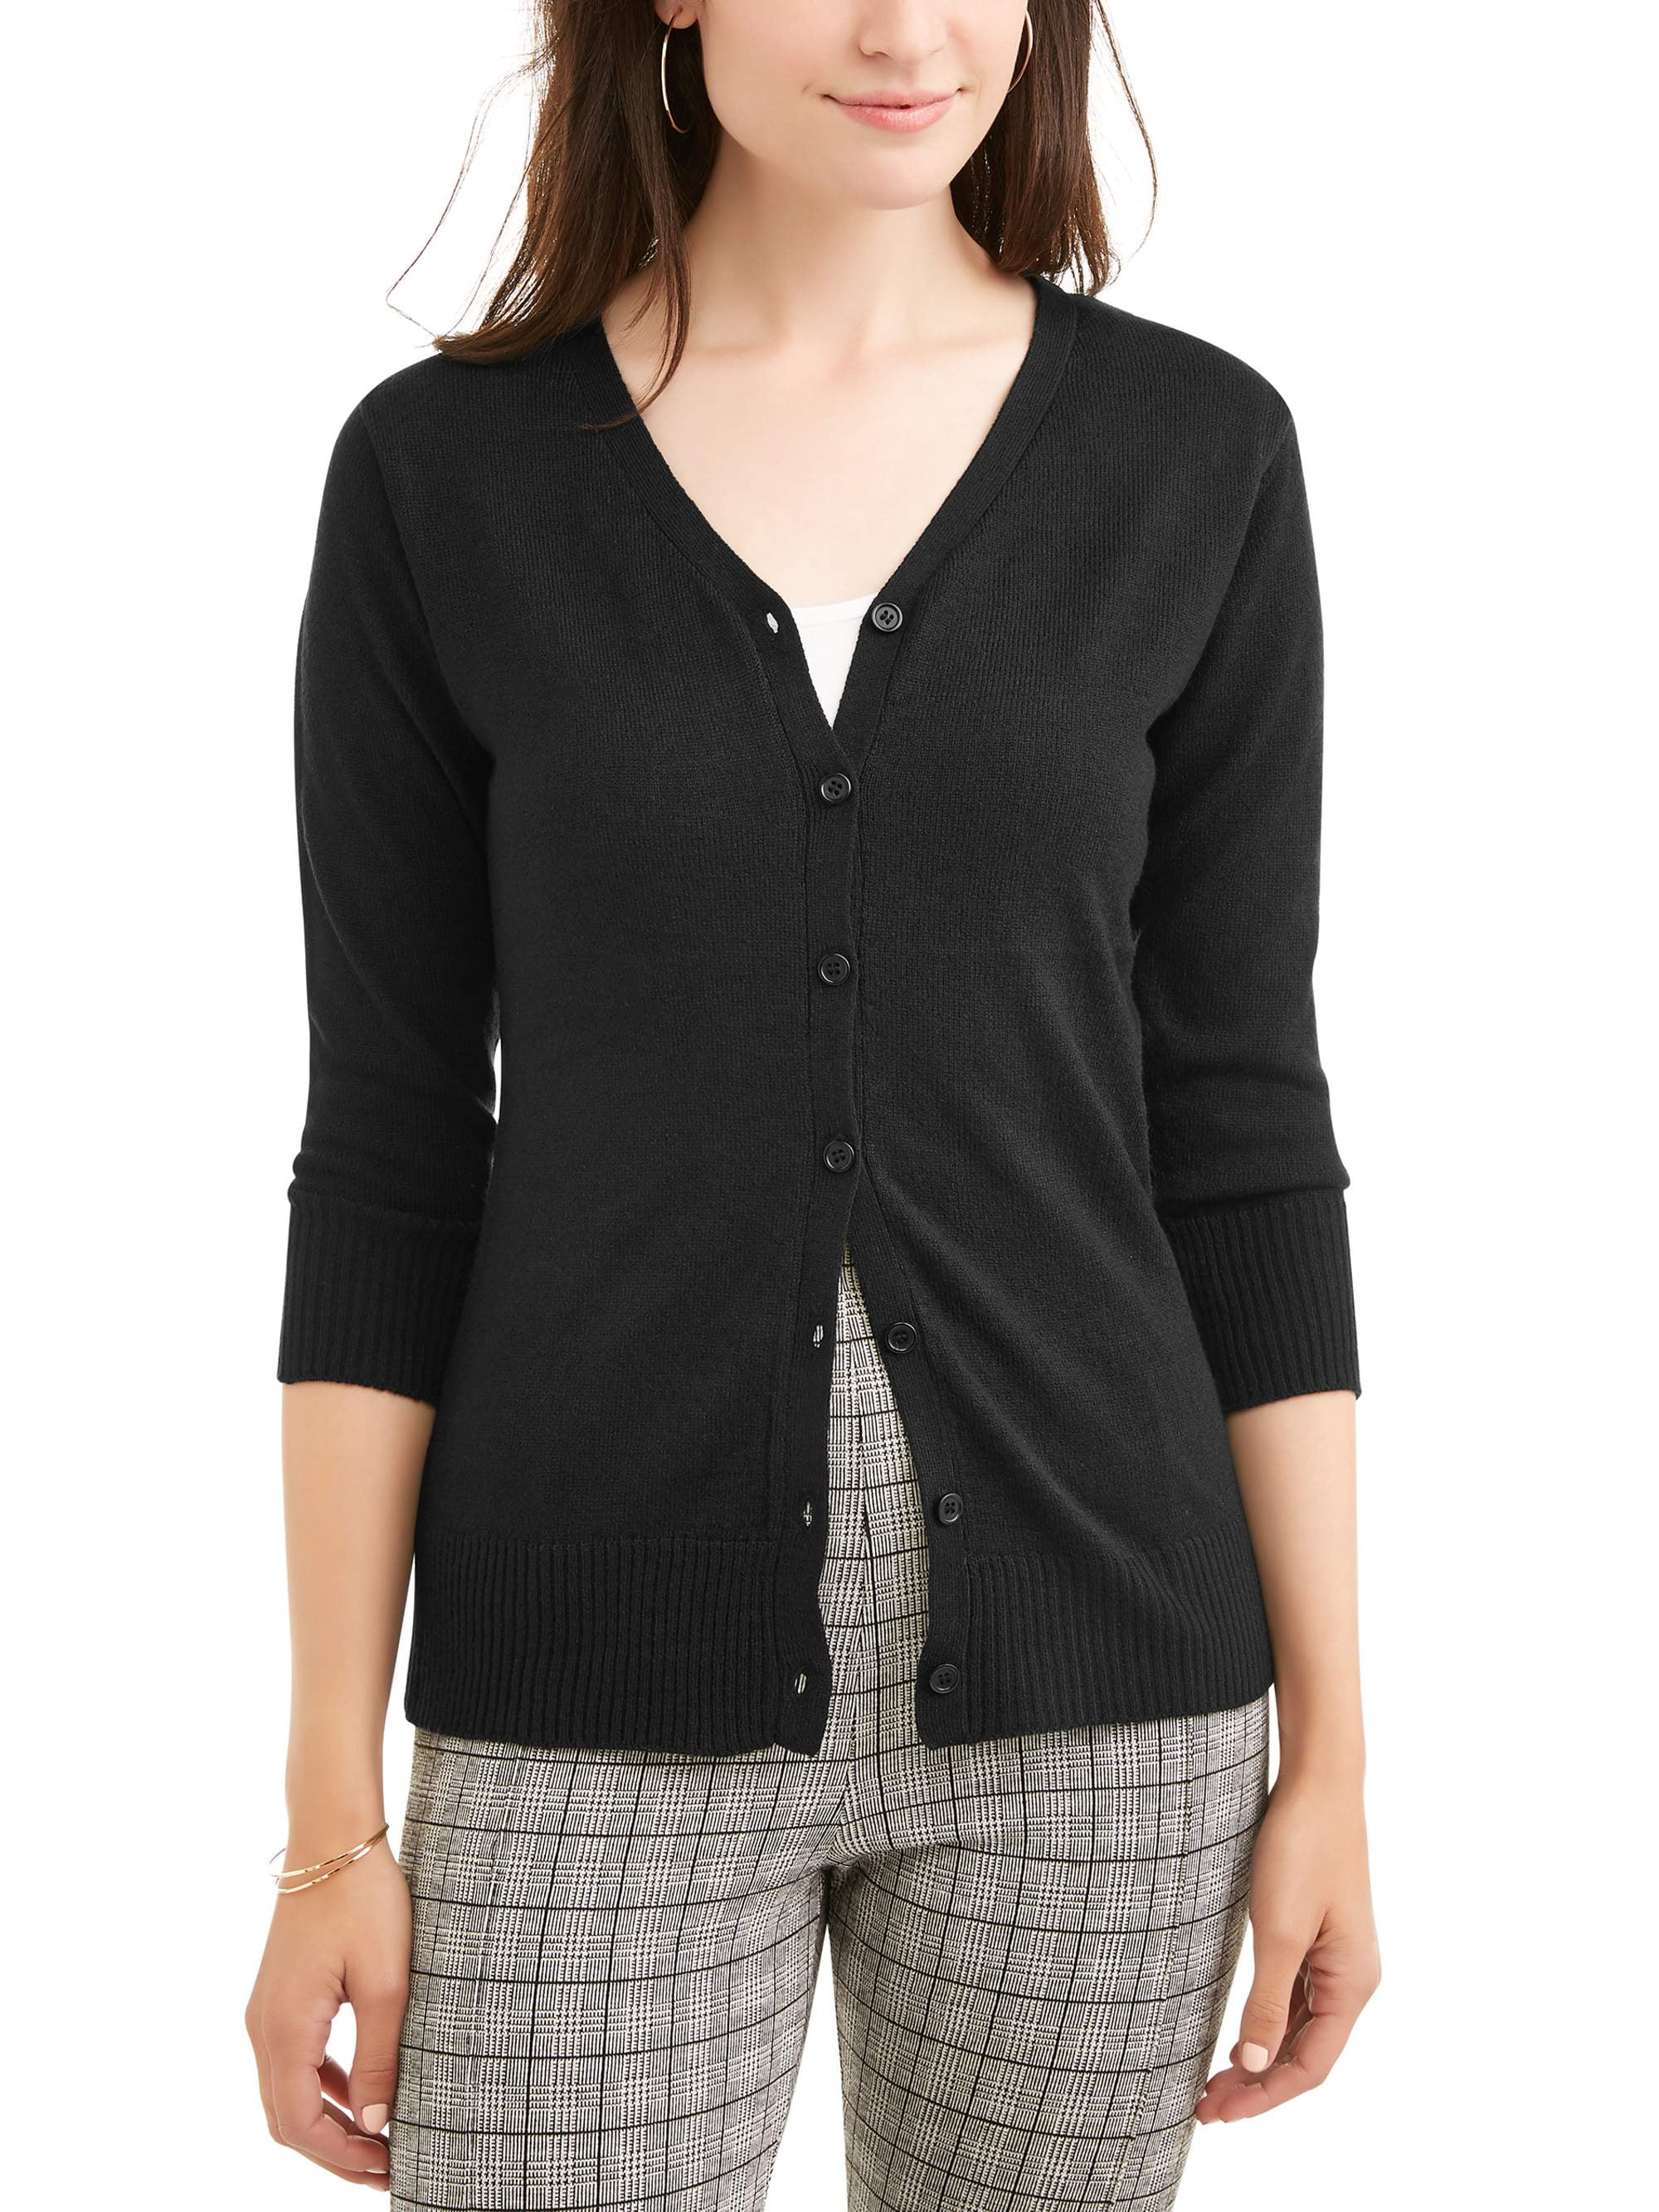 CARDIGAN / SWEATER BUTTON FRONT XS-3XL ANTI-PILL LADIES V-NECK EASY CARE